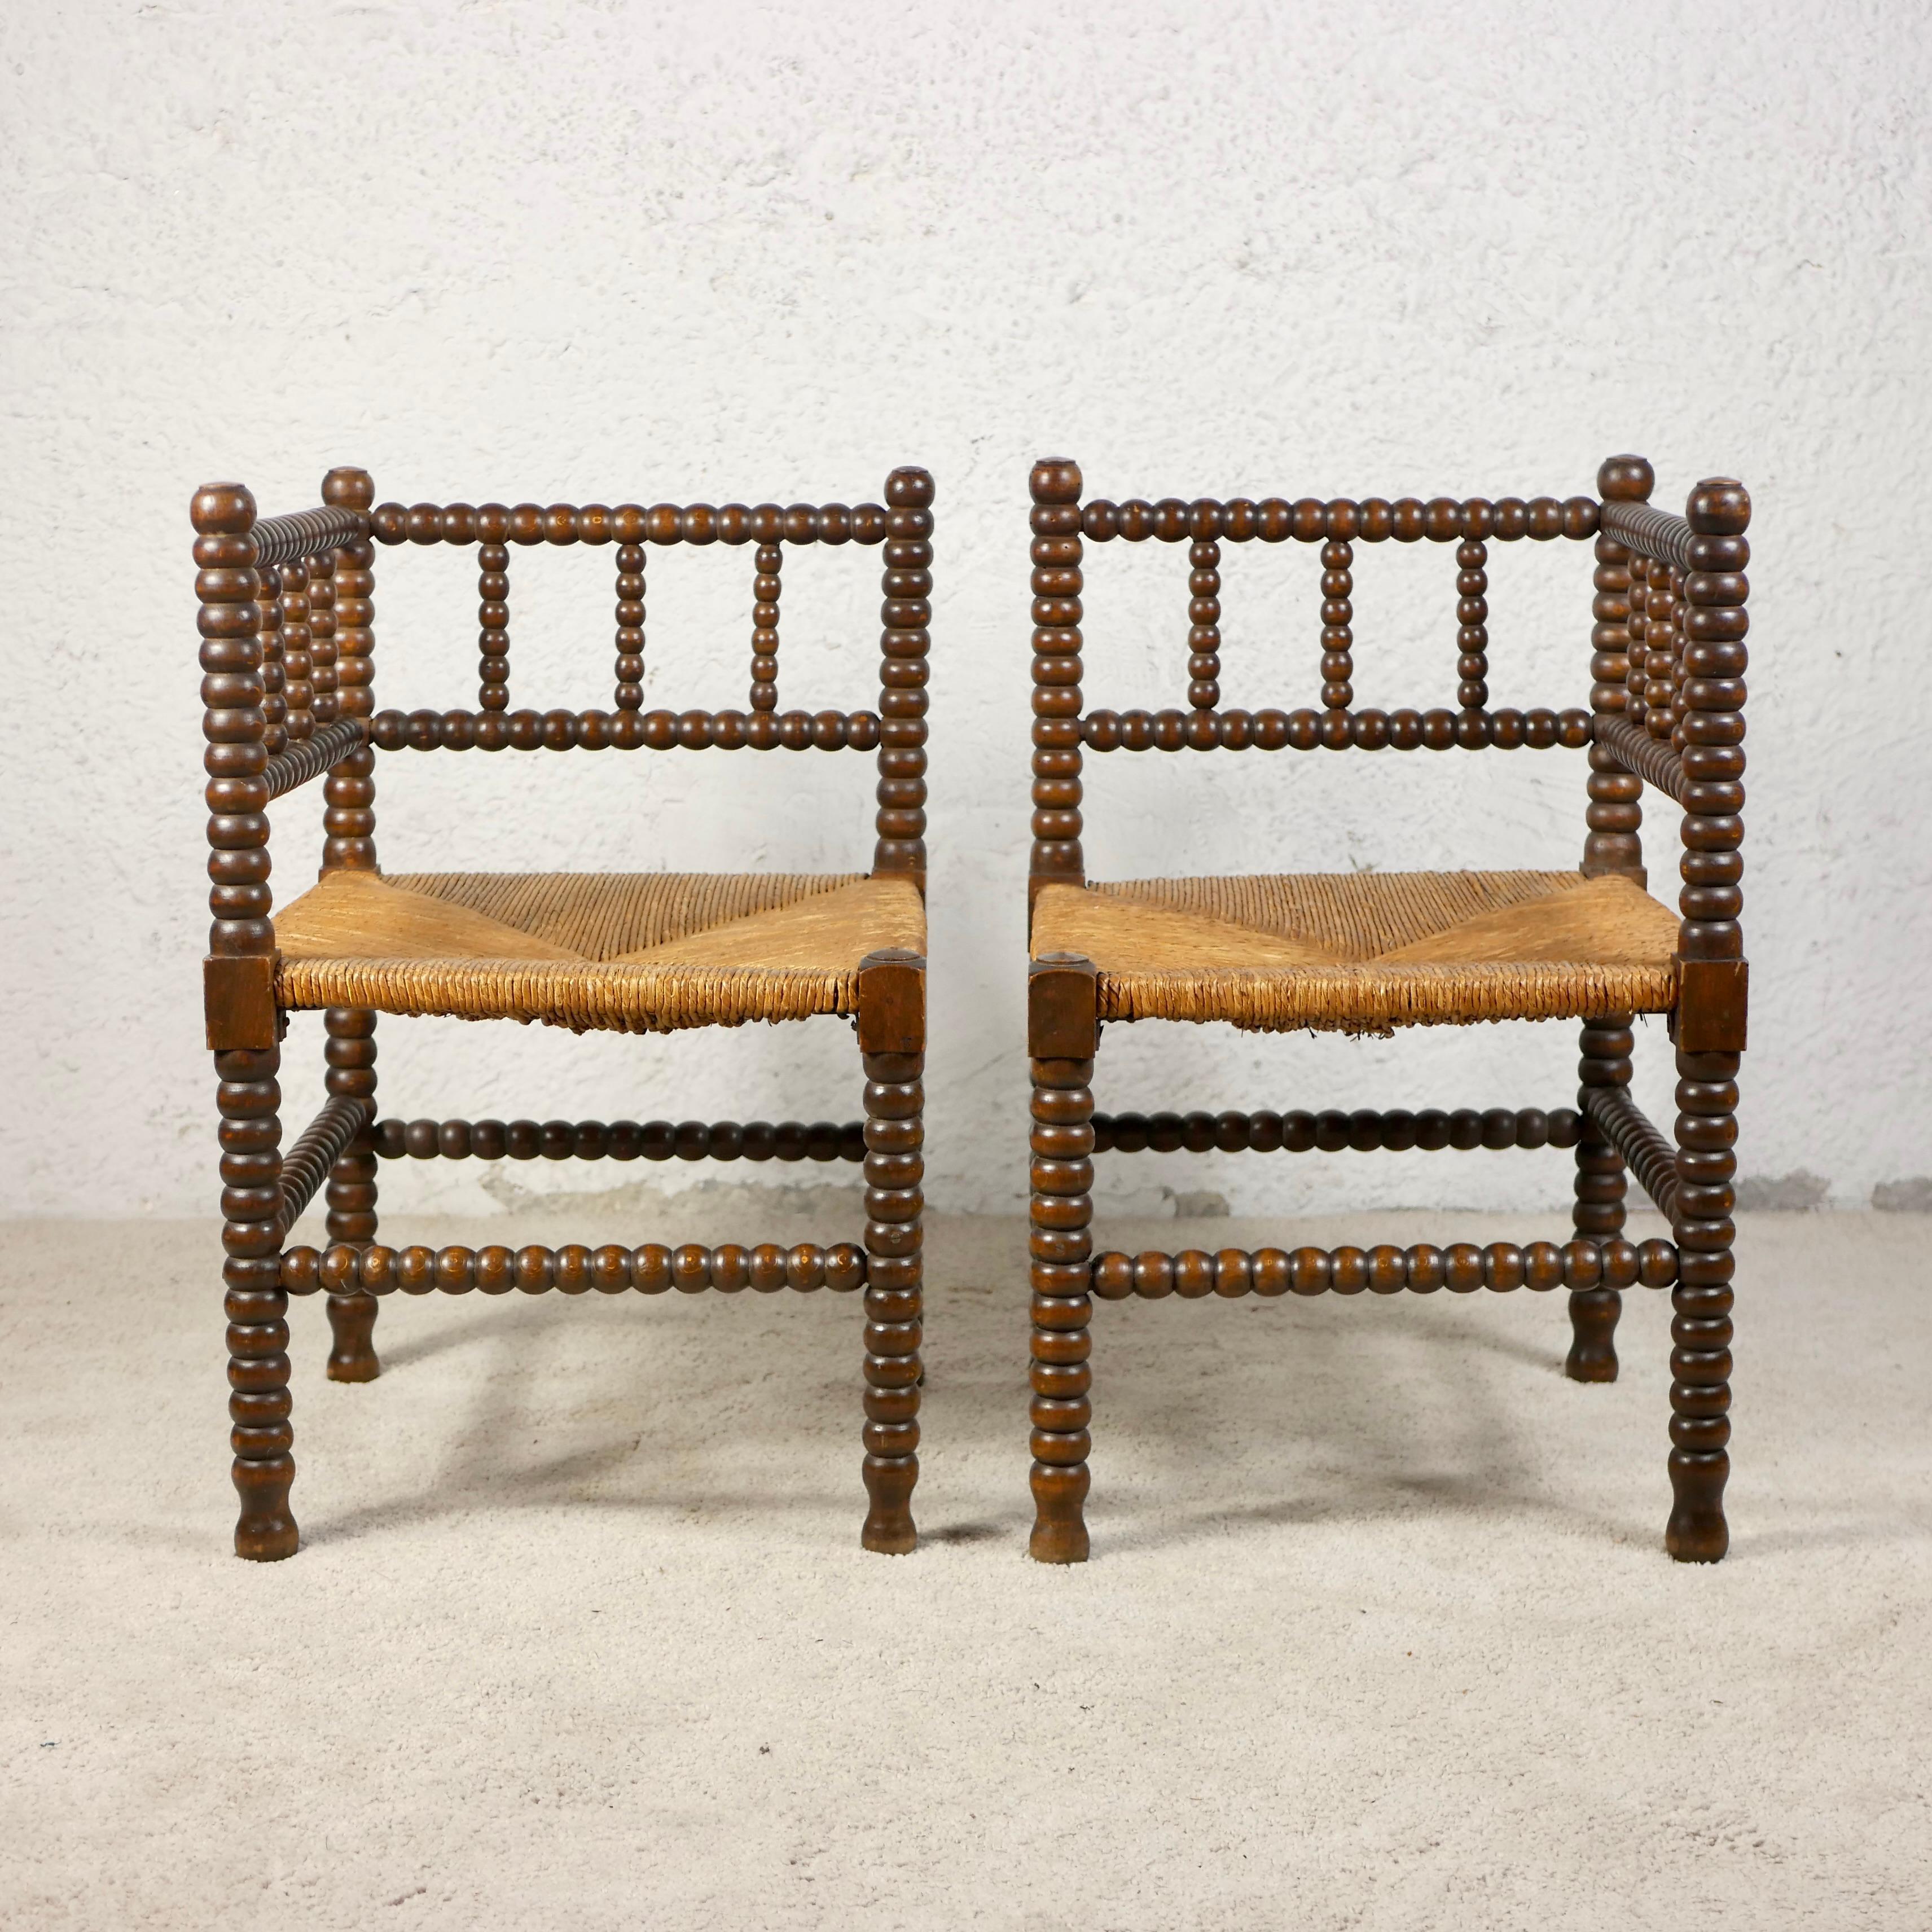 Nice pair of two corner chairs, also called Bobbin chairs, made in France between the second half of the 19th century and the beginning of the 20th century. 
They were common pieces of furniture especially in the countryside and were used as